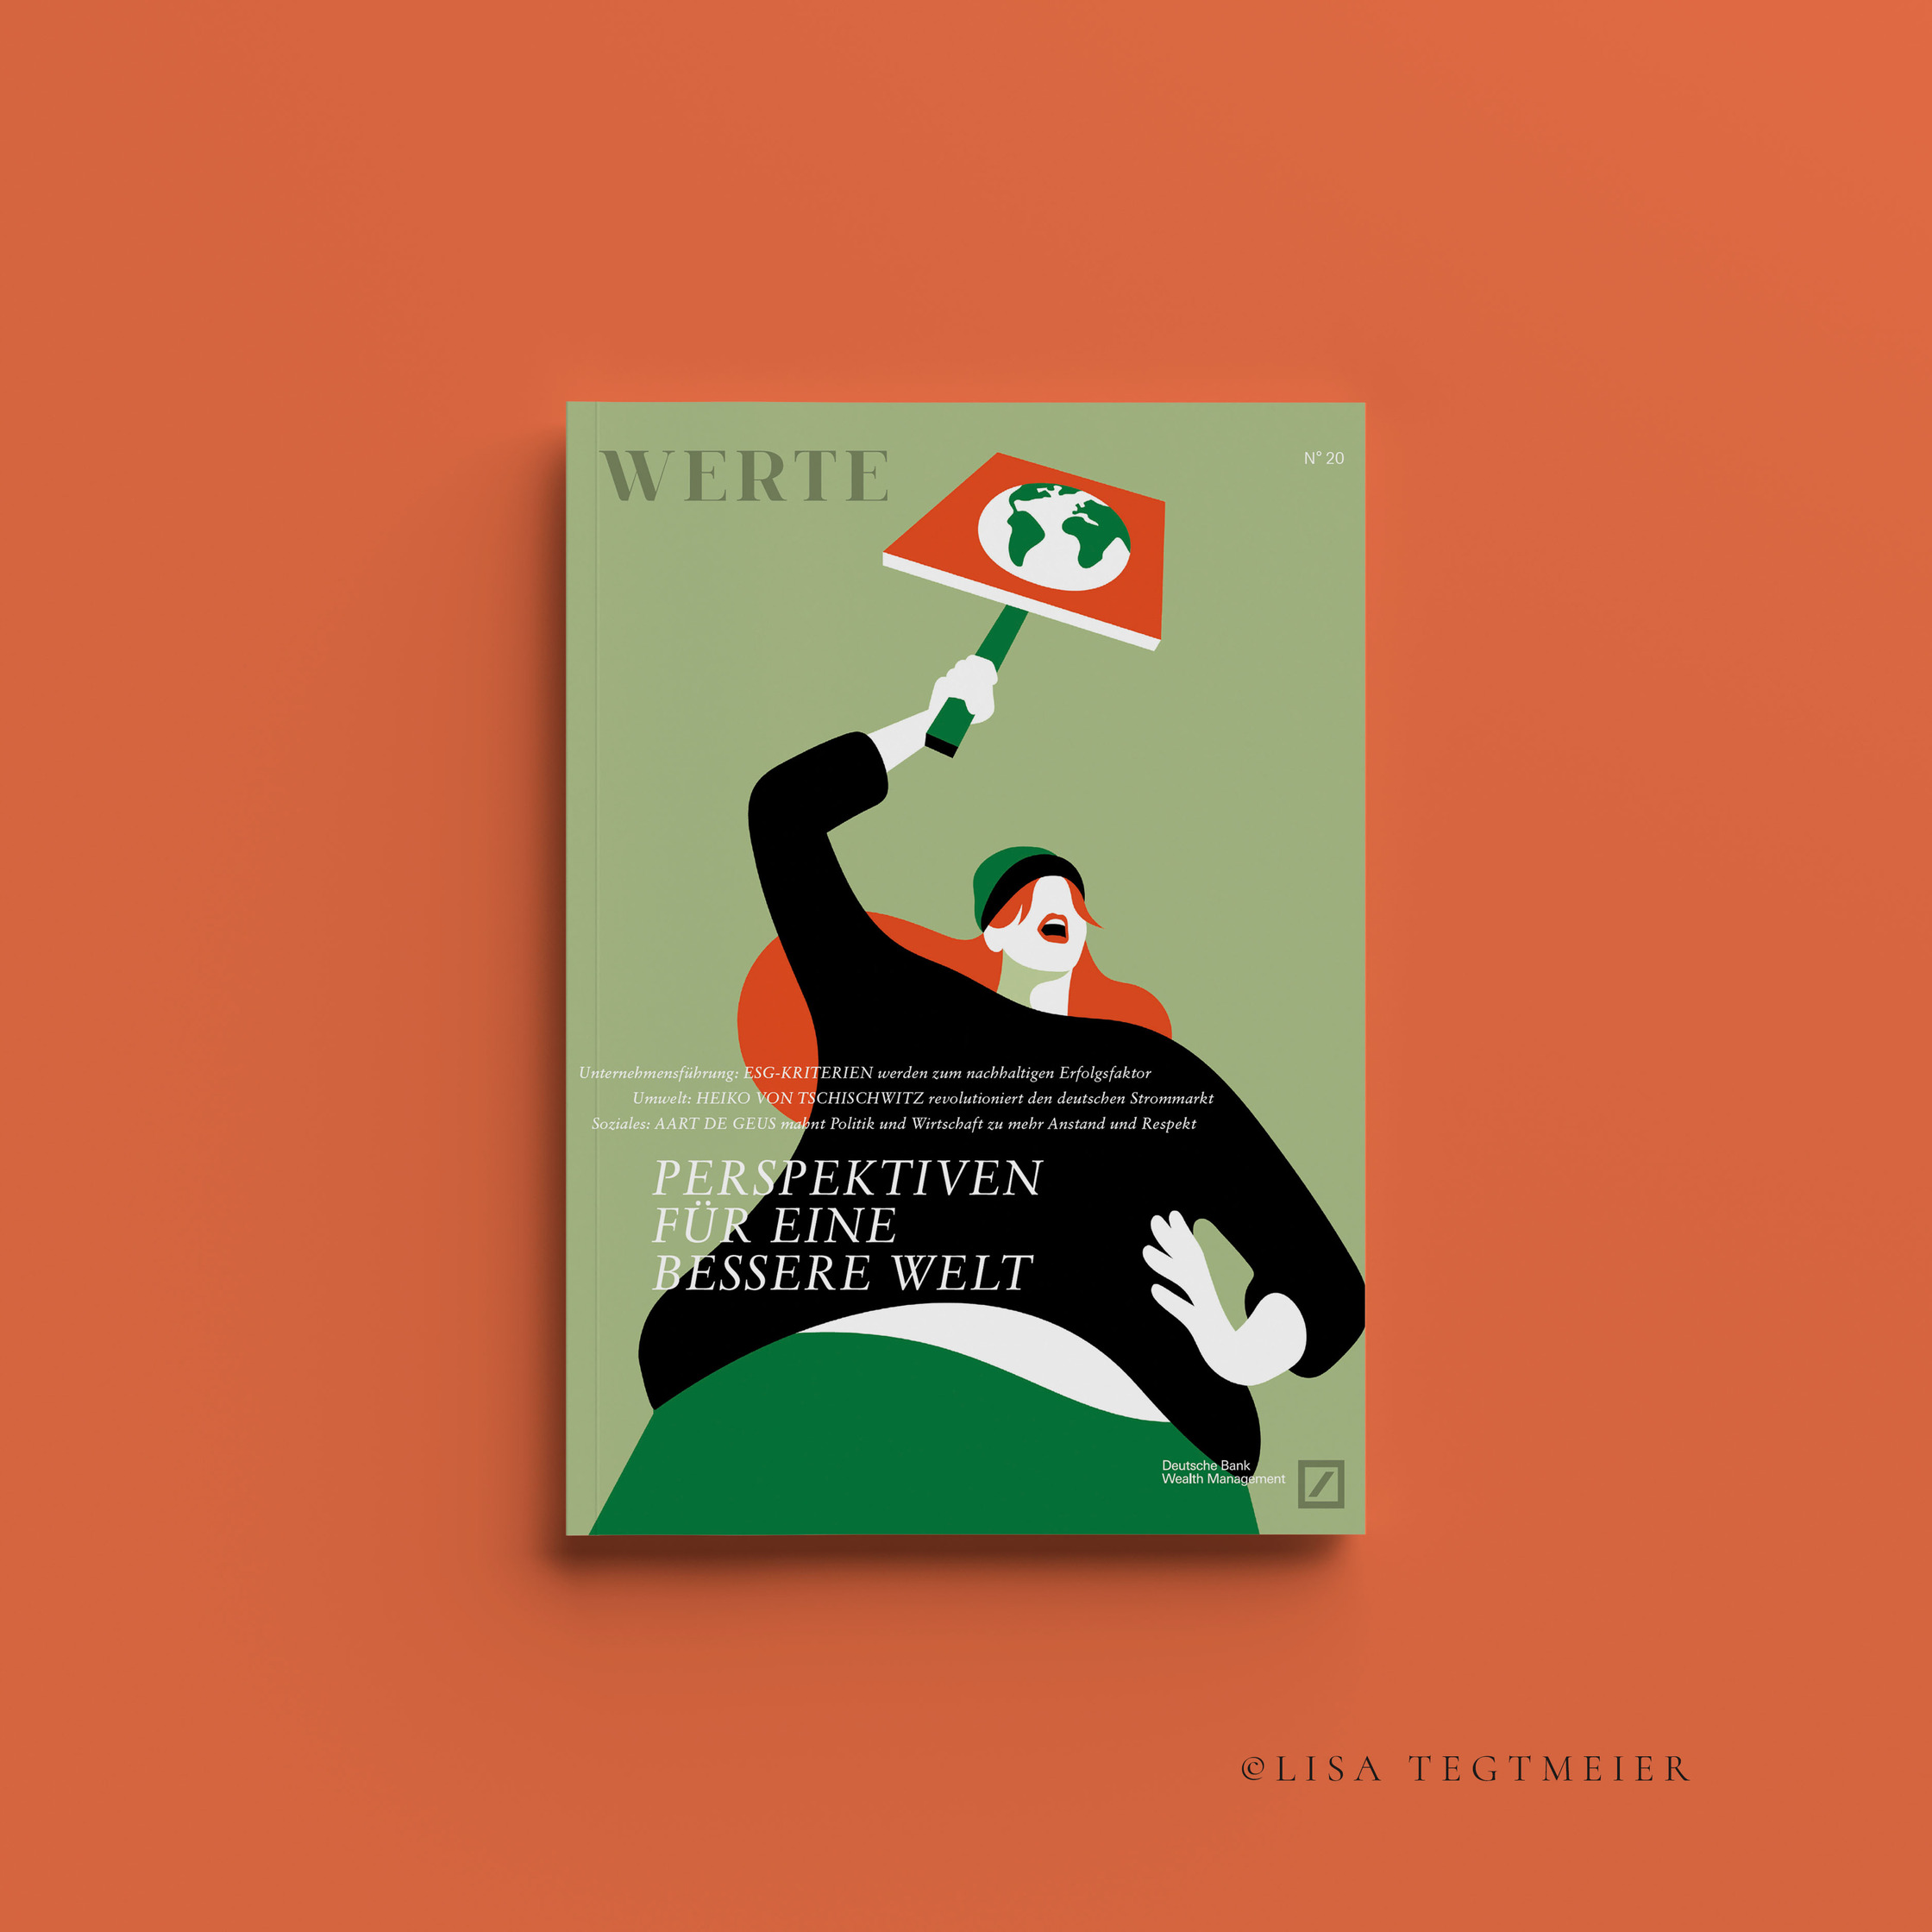 magazine cover of werte showing an illustration of a woman demonstrating during fridays for future